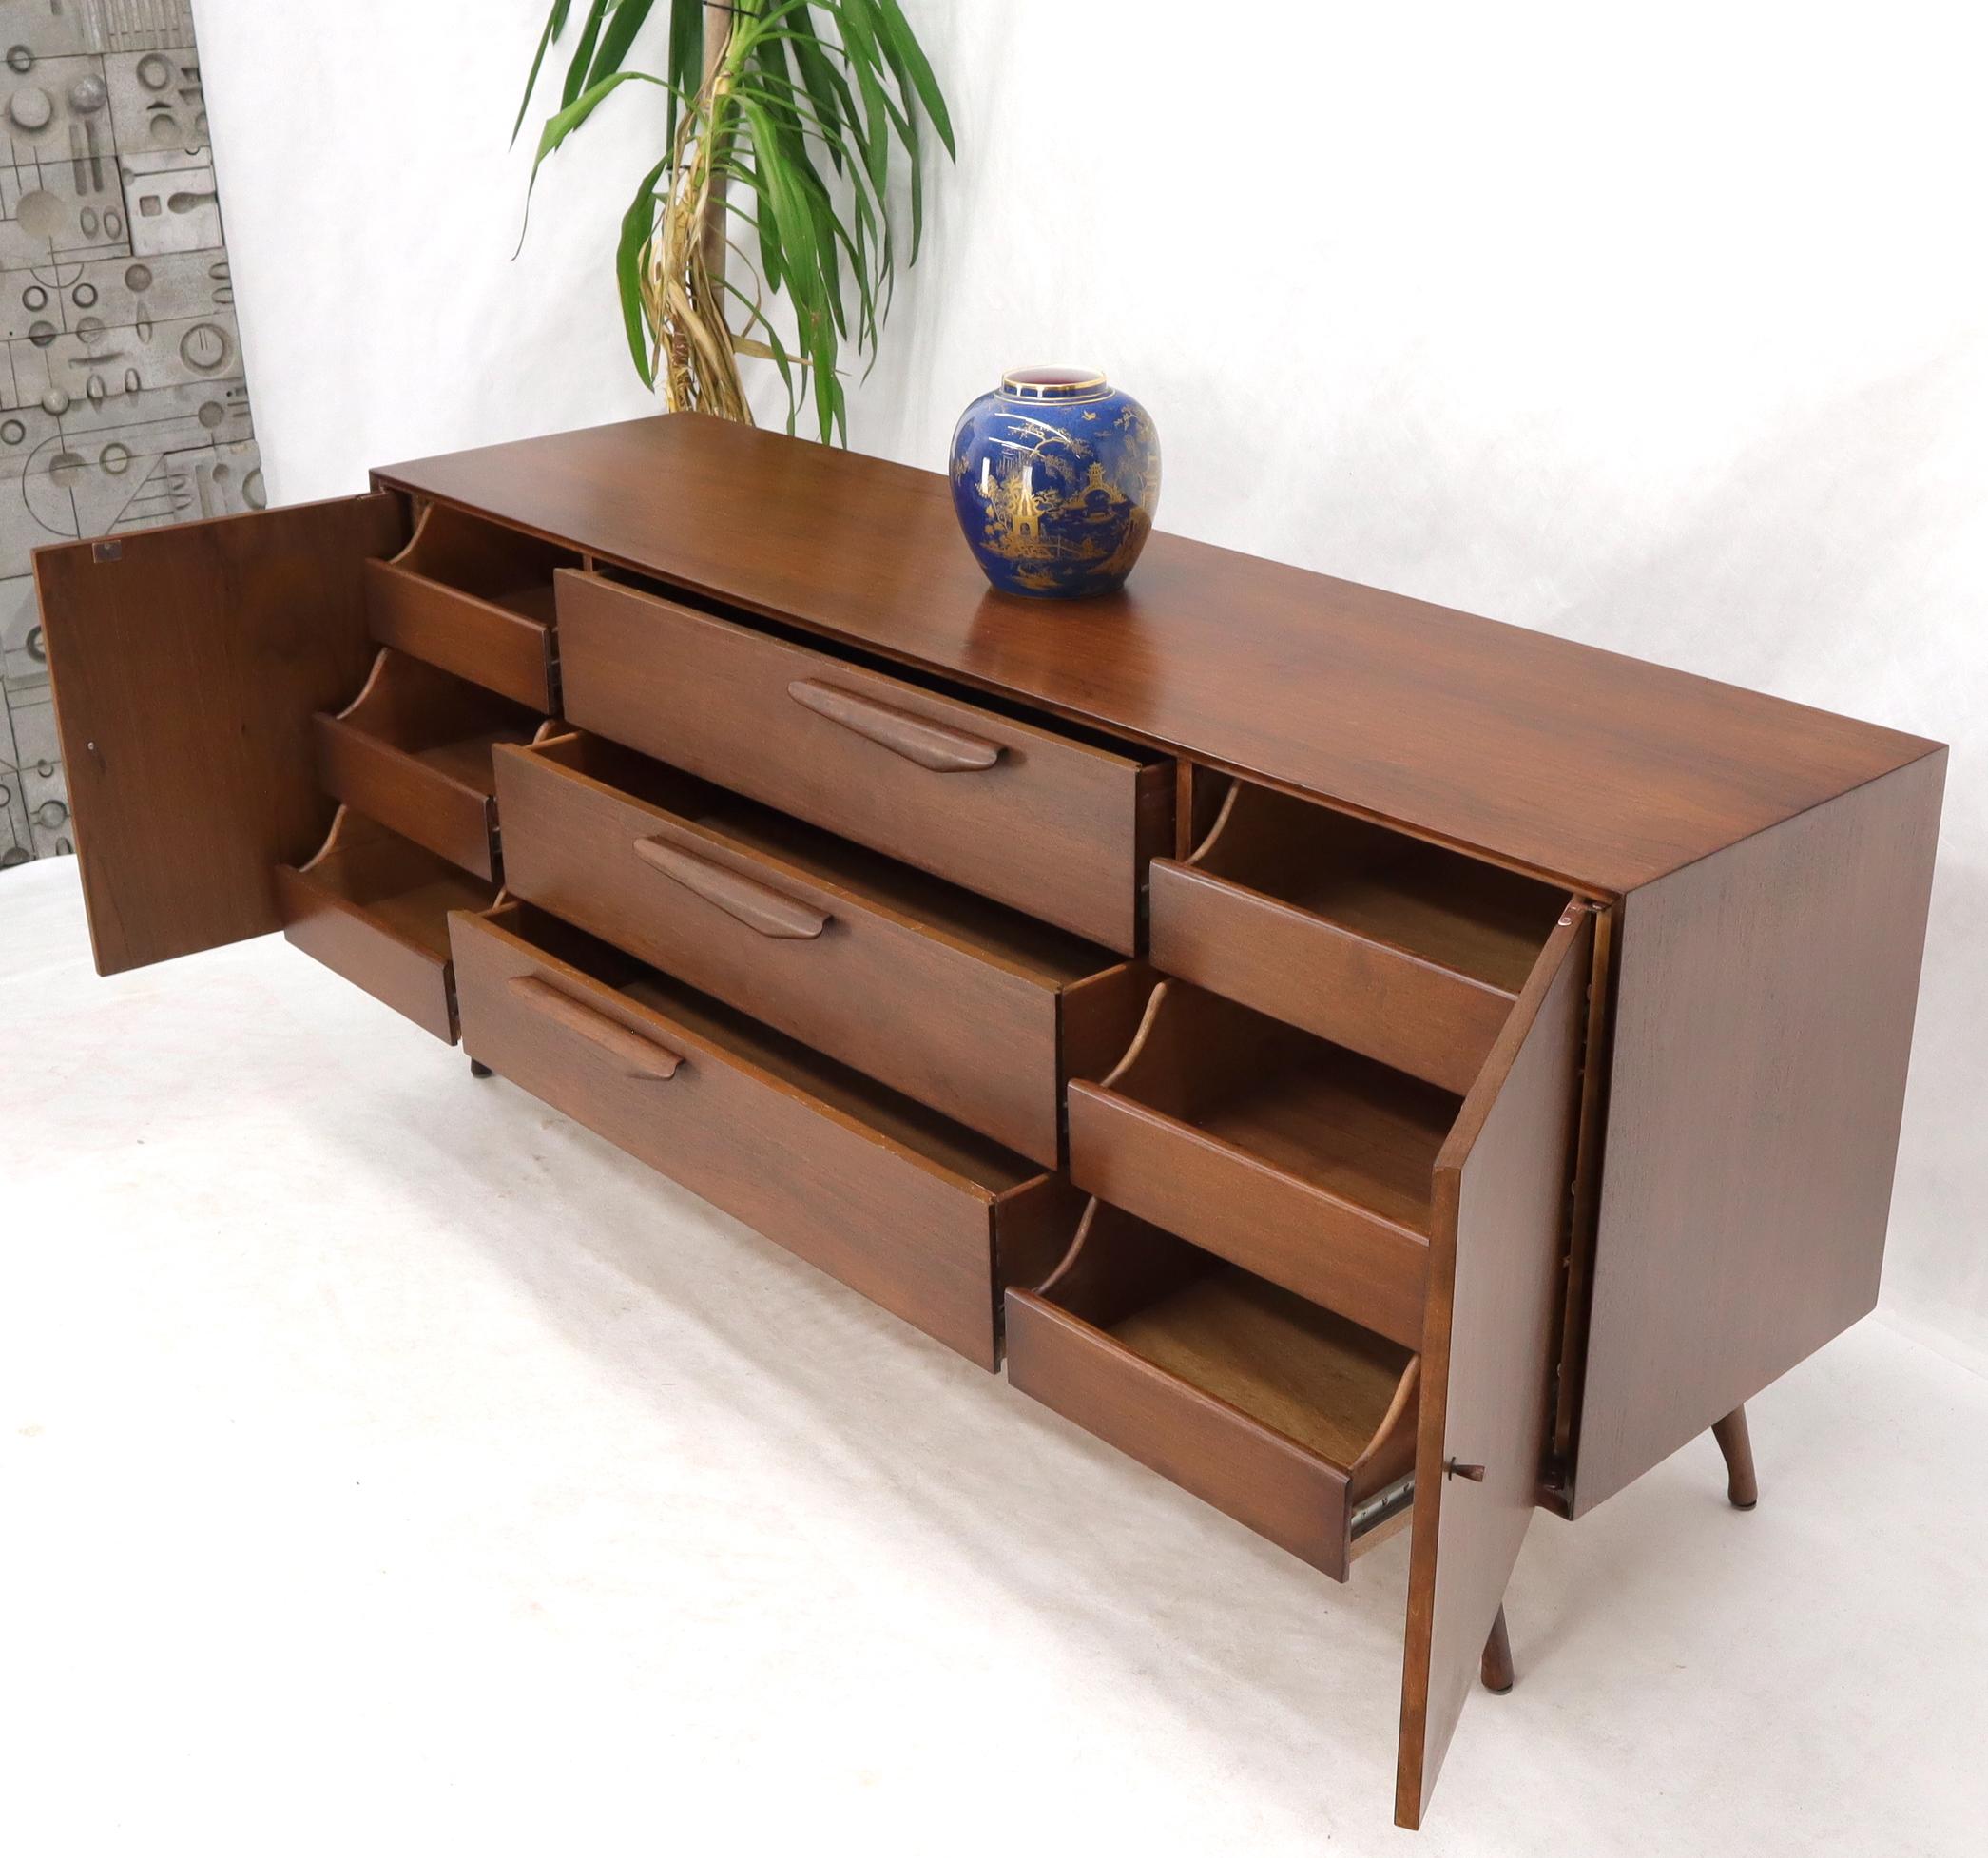 Mid-Century Modern long nine drawers dresser walnut credenza with doors compartments on sculptural legs.
Refinished in oiled walnut finish.